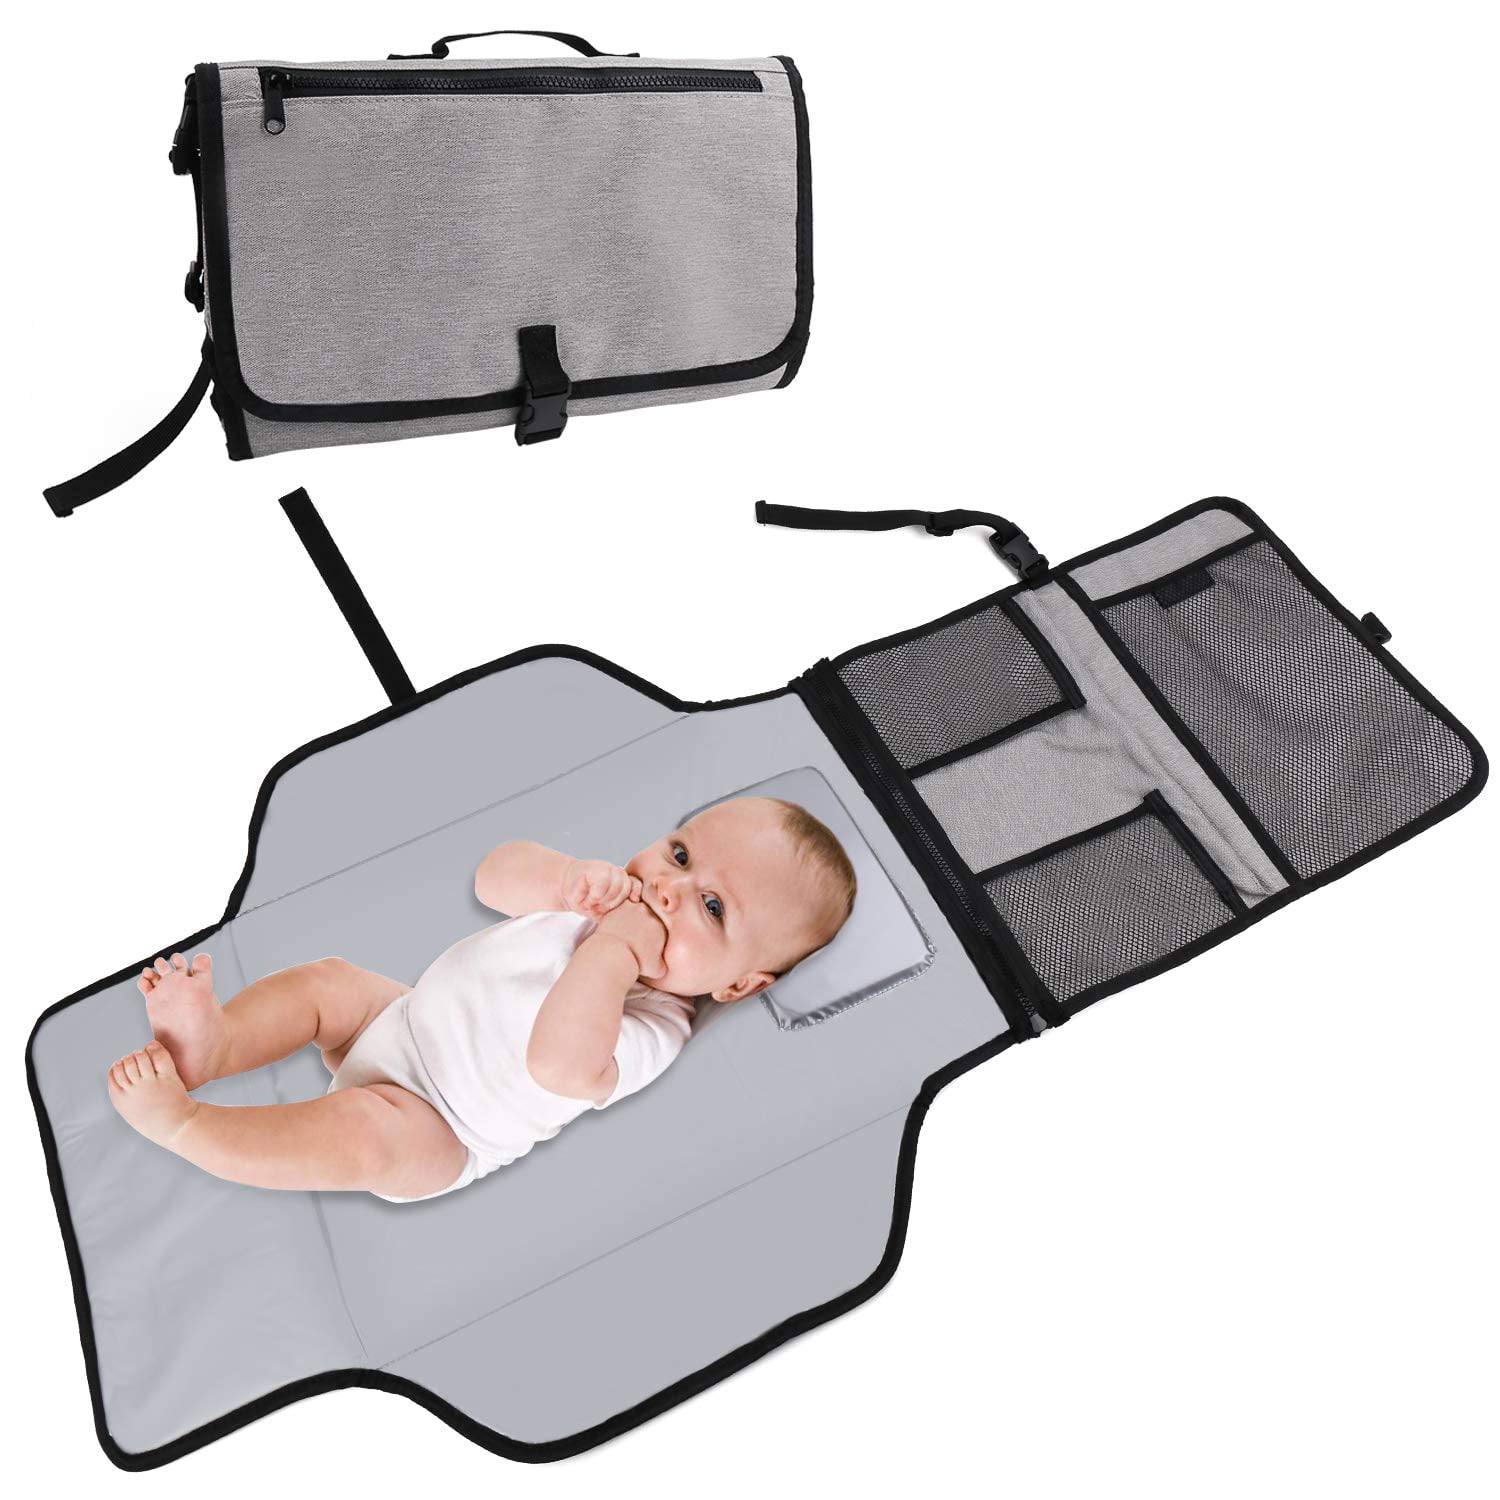 Travel Changing Nappy Mat Portable Baby Waterproof Long Design for Toddlers 